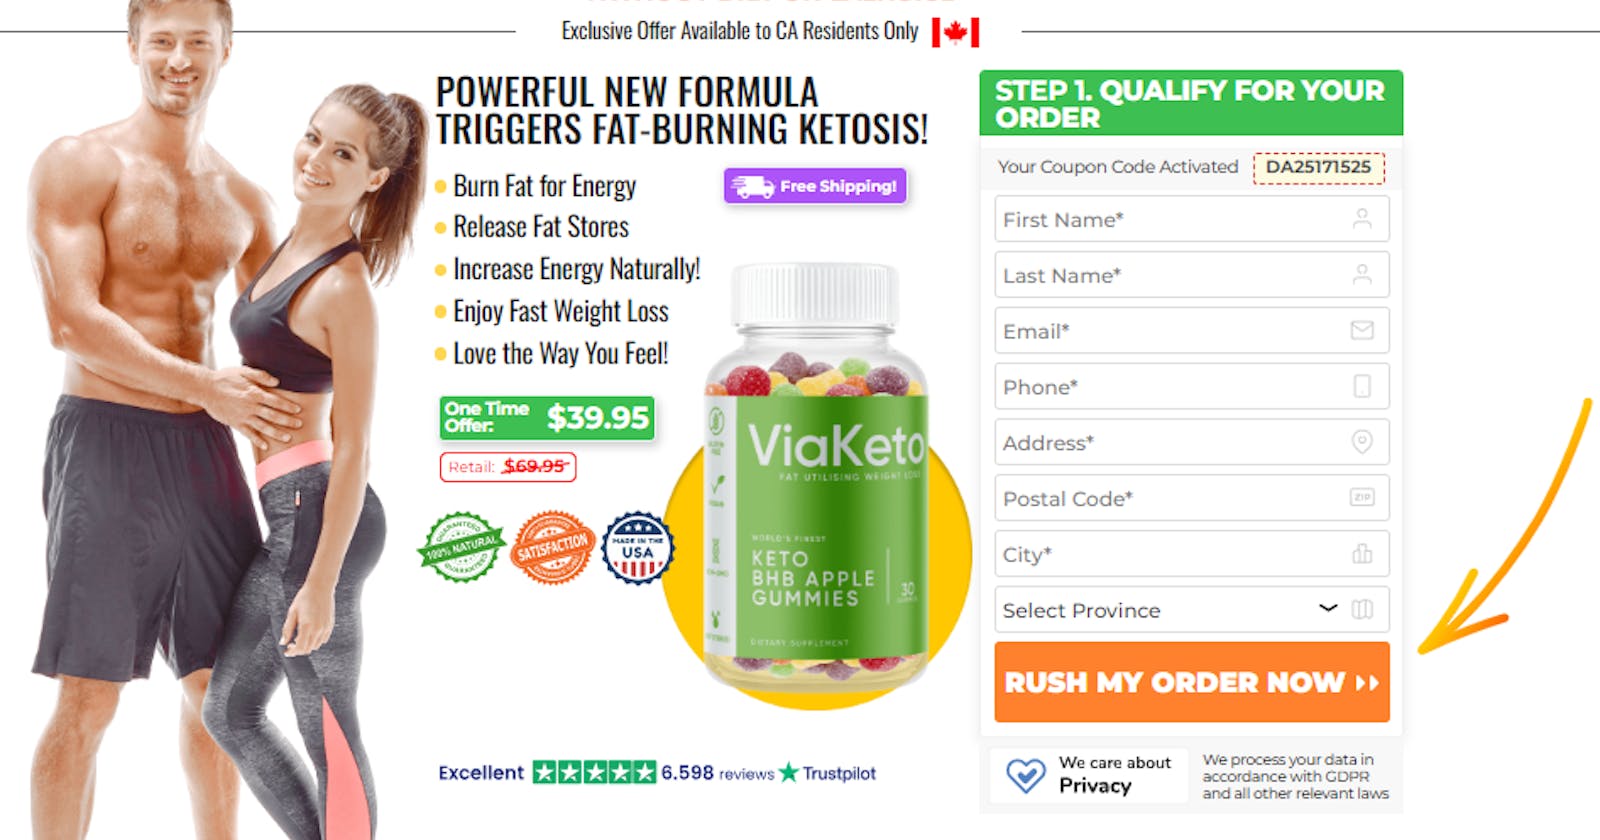 Via Keto Apple Gummies Canada Reviews: Best Offers, Price and Buy?